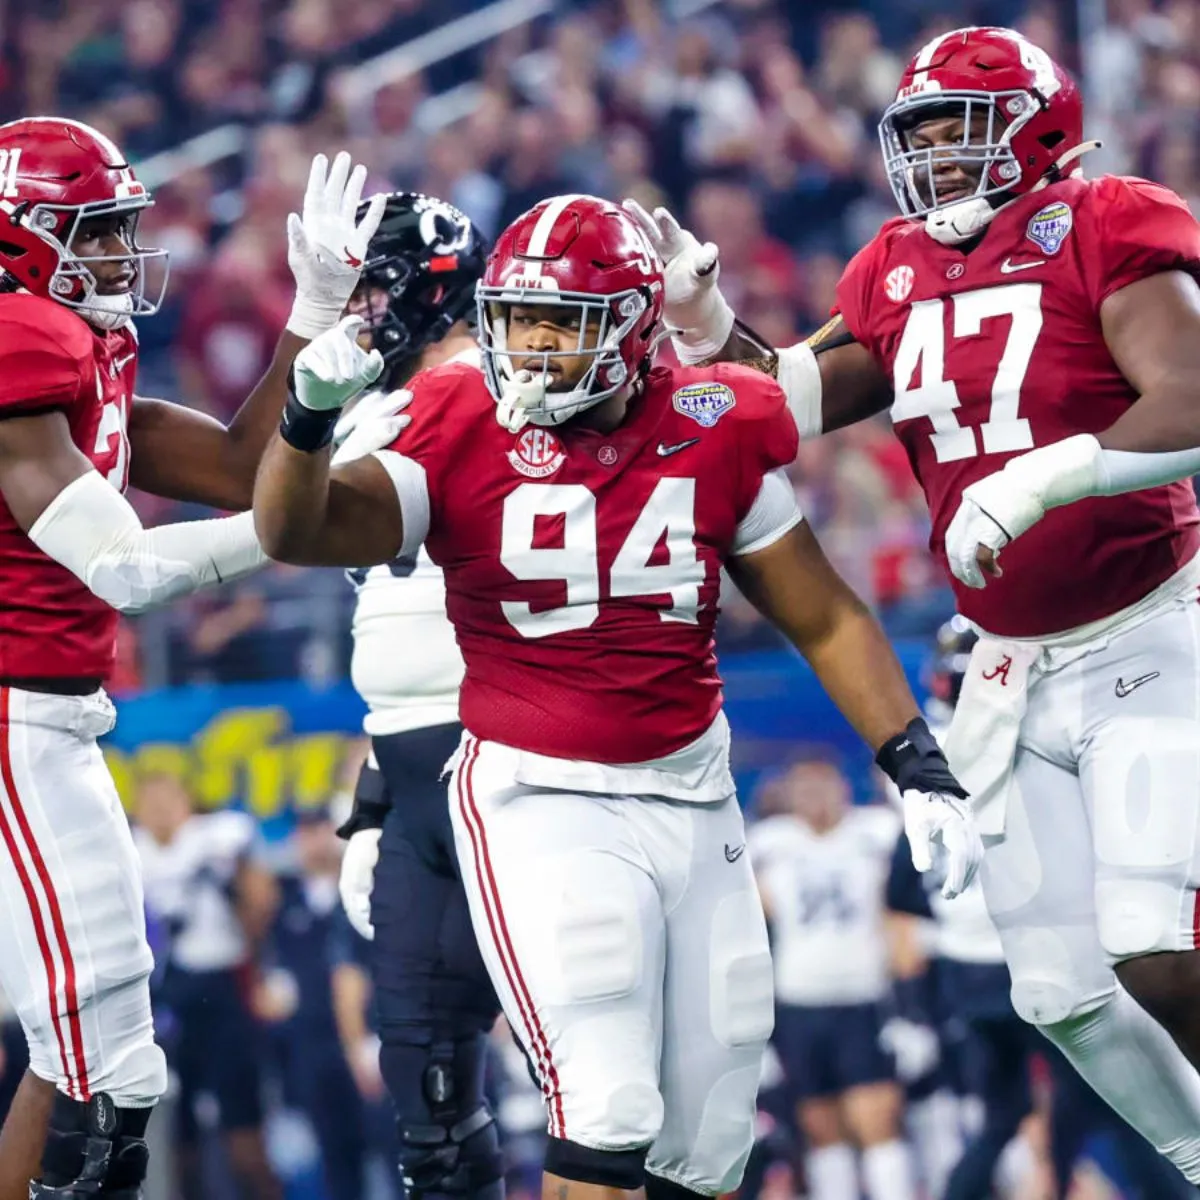 A critical and underrated position battle for Alabama Football